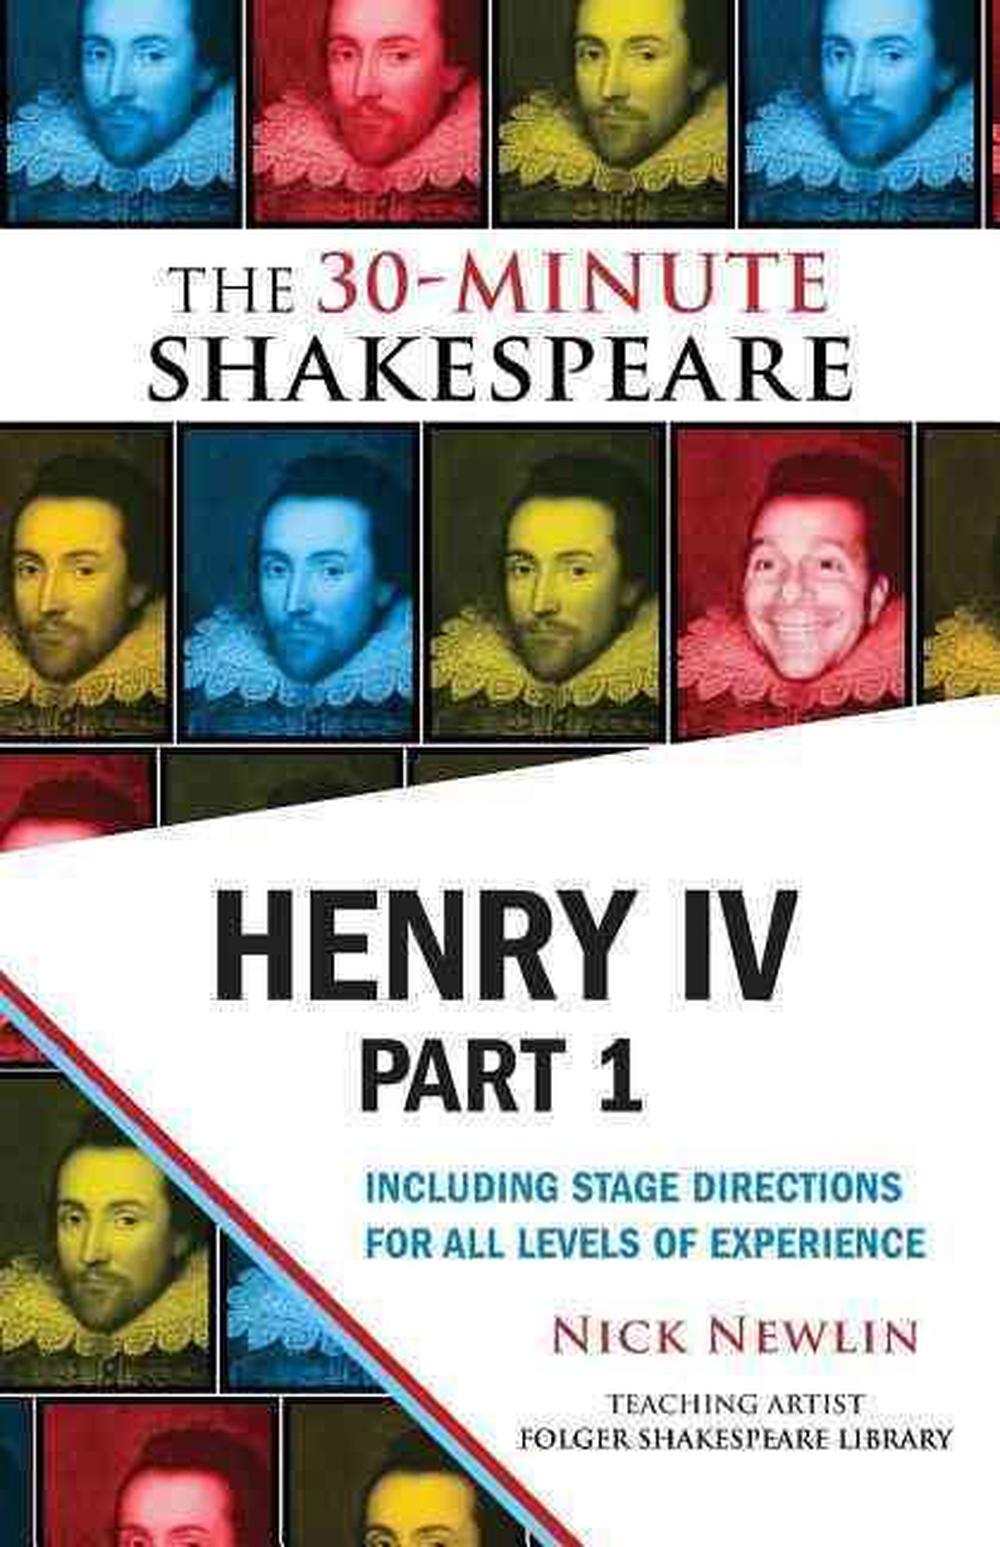 King Henry IV, Part 1 by William Shakespeare